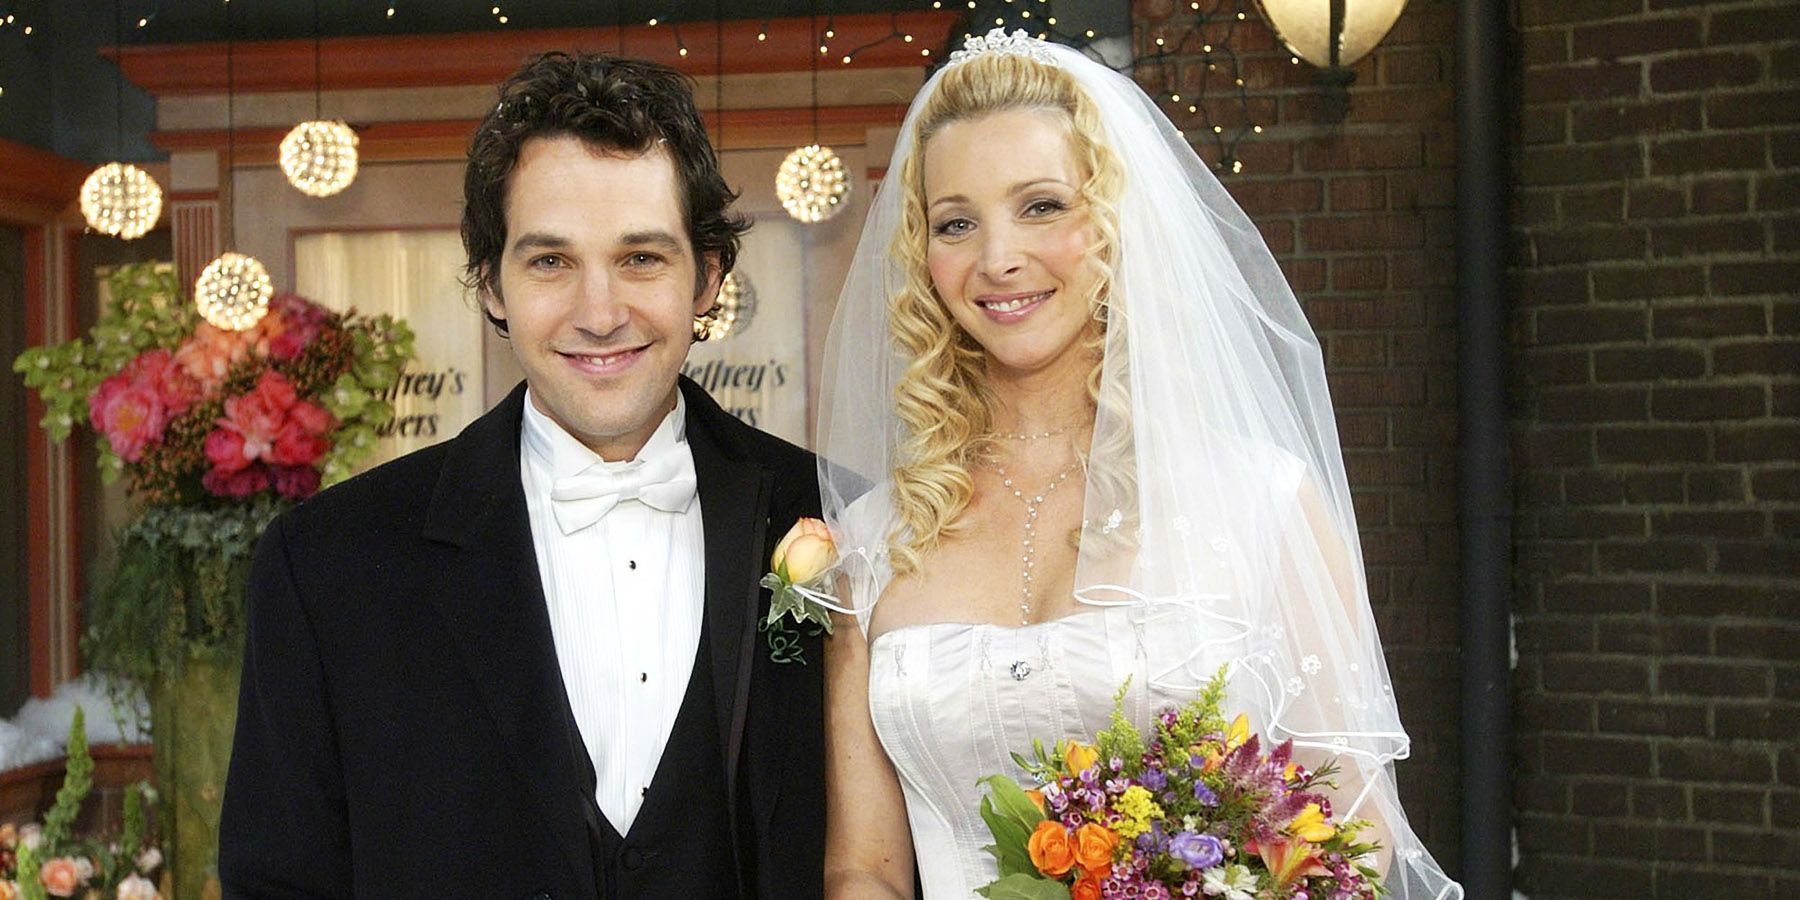 Phoebe and Mike smiling at their wedding in Friends